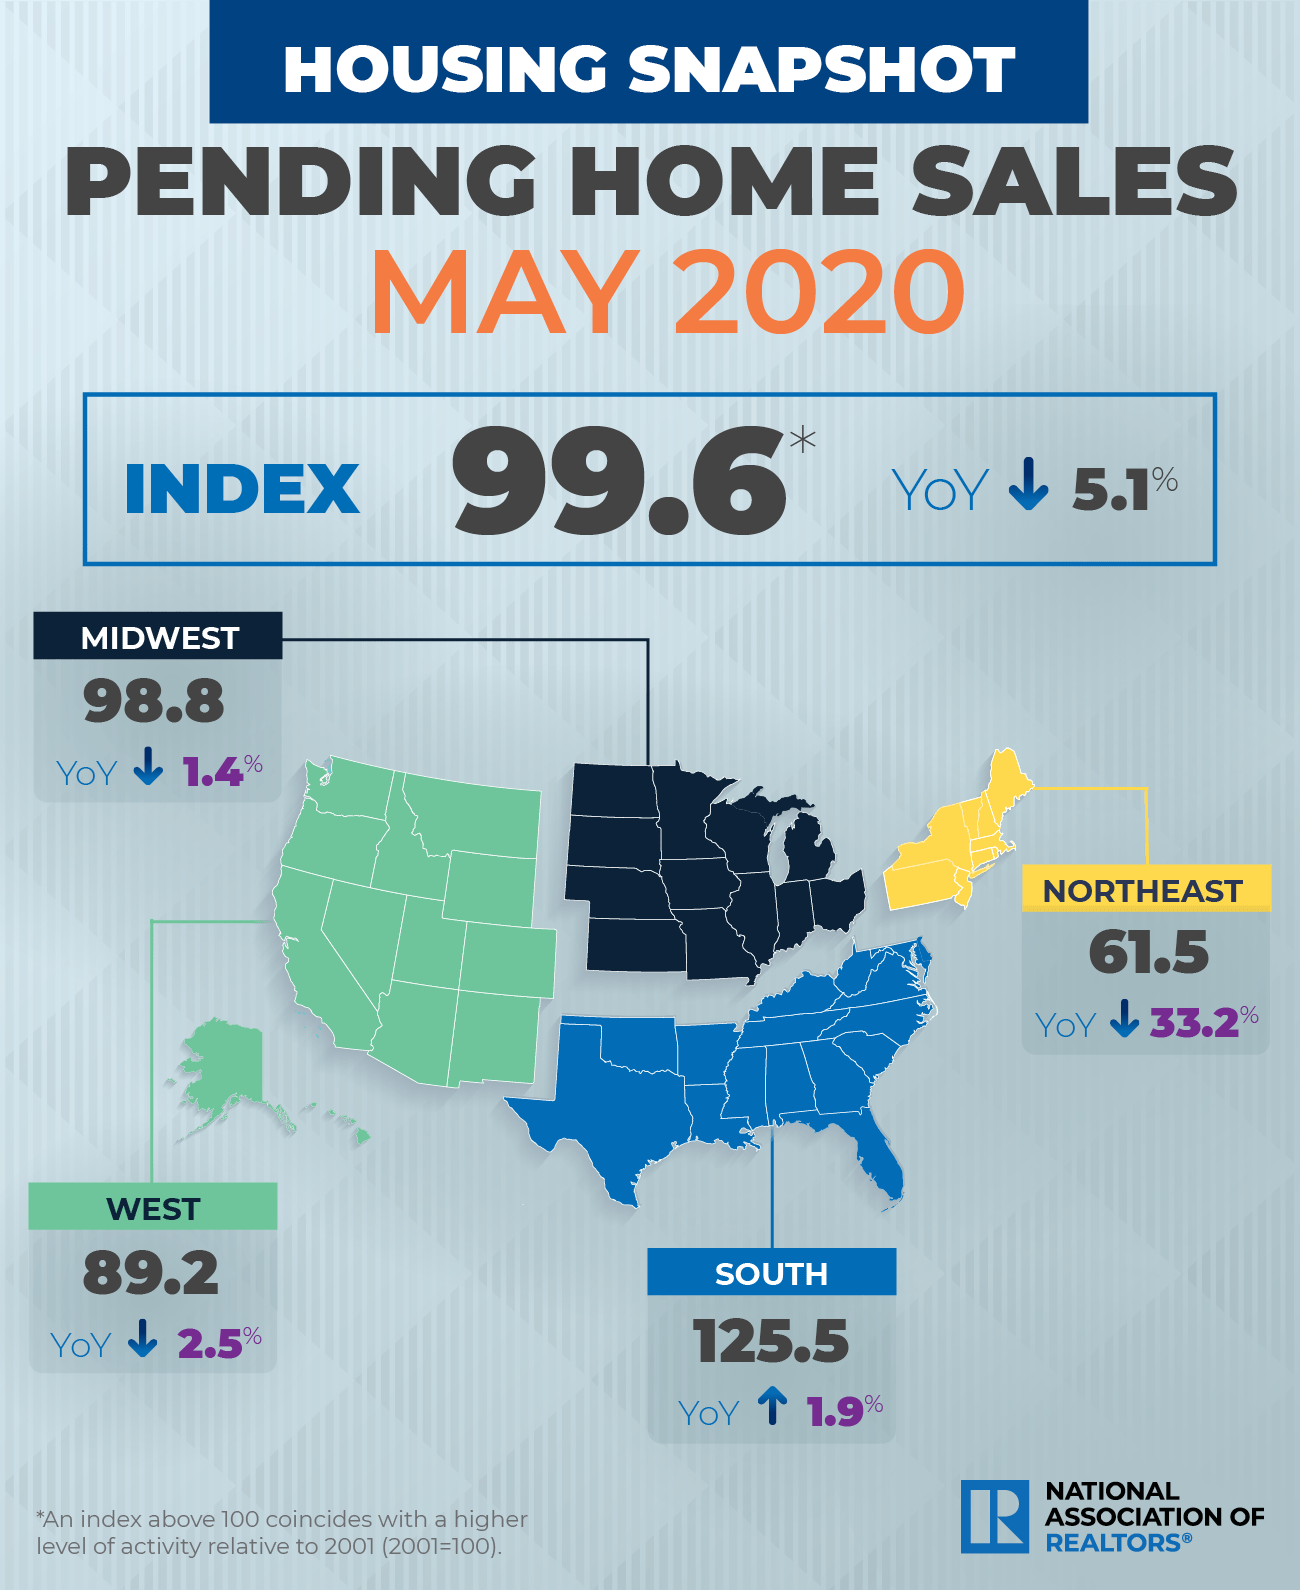 According to the National Association of Realtors (NAR), pending home sales mounted a record comeback in May